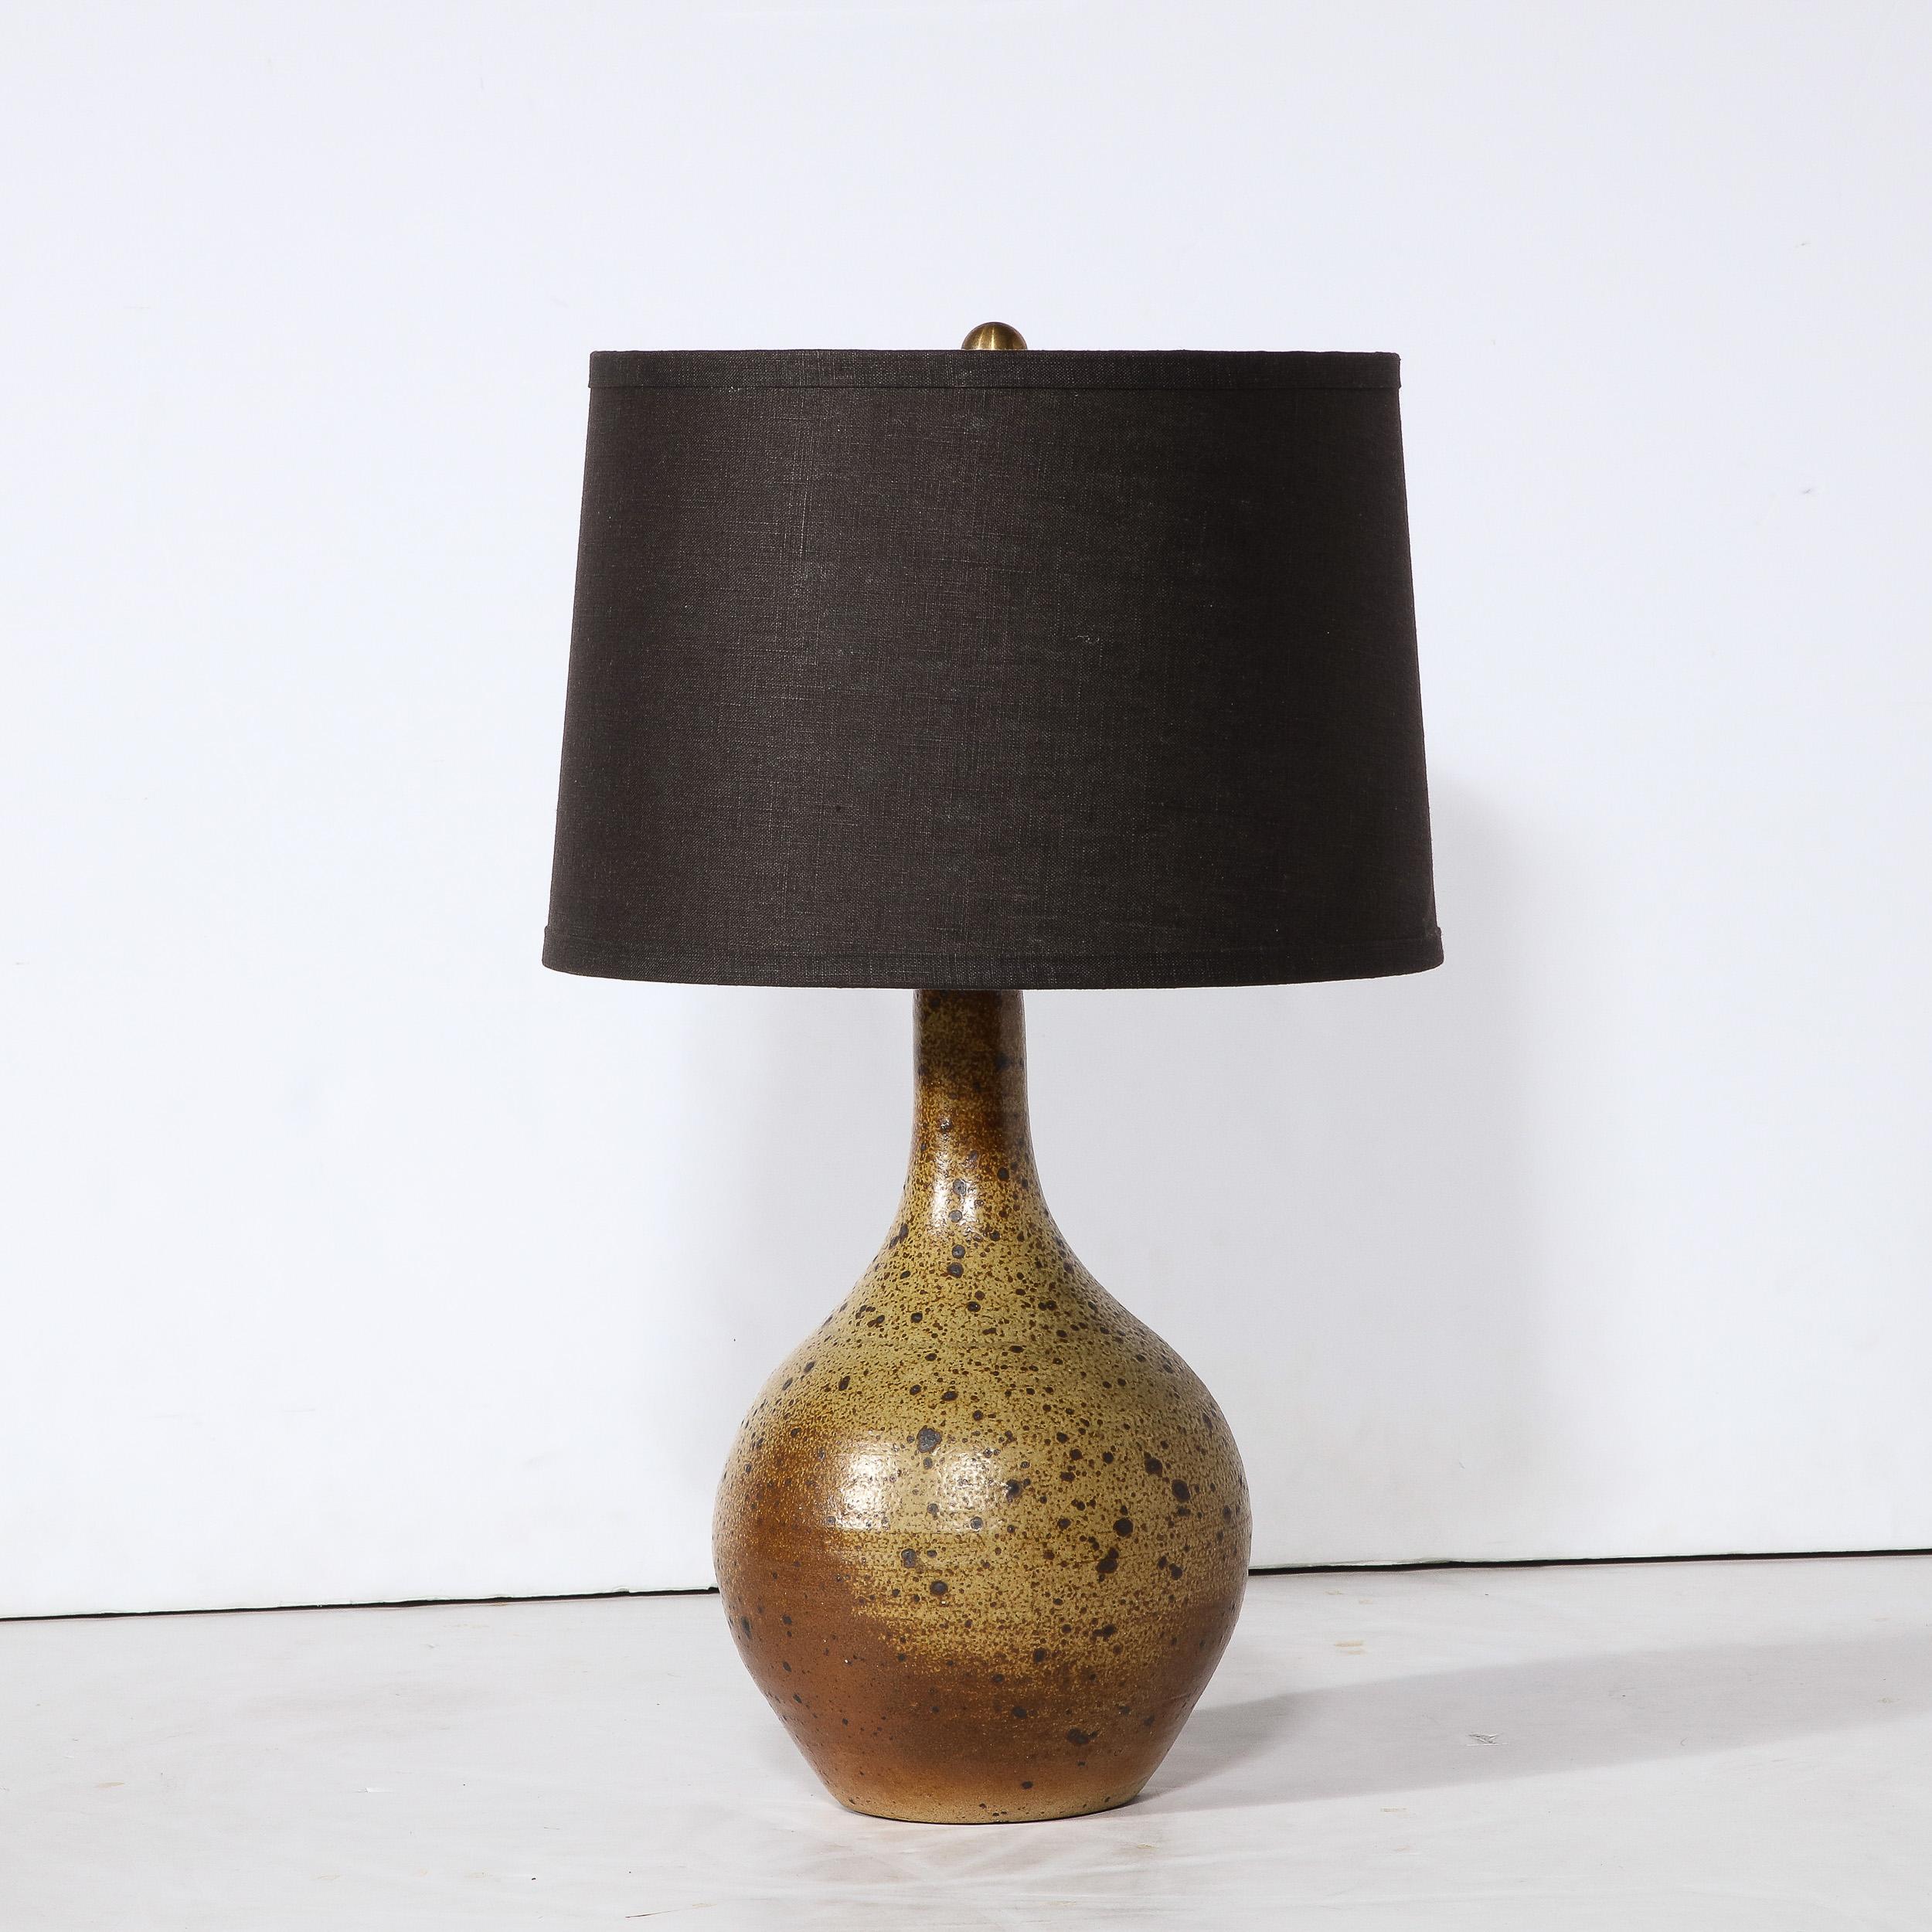 This sophisticated Mid-Century Modern table lamp was realized in France circa 1960. It features a tear drop form with a protuberant base that tapers to a conical neck in a rich palate of earth tones. Hand glazed with a speckled lava like texture